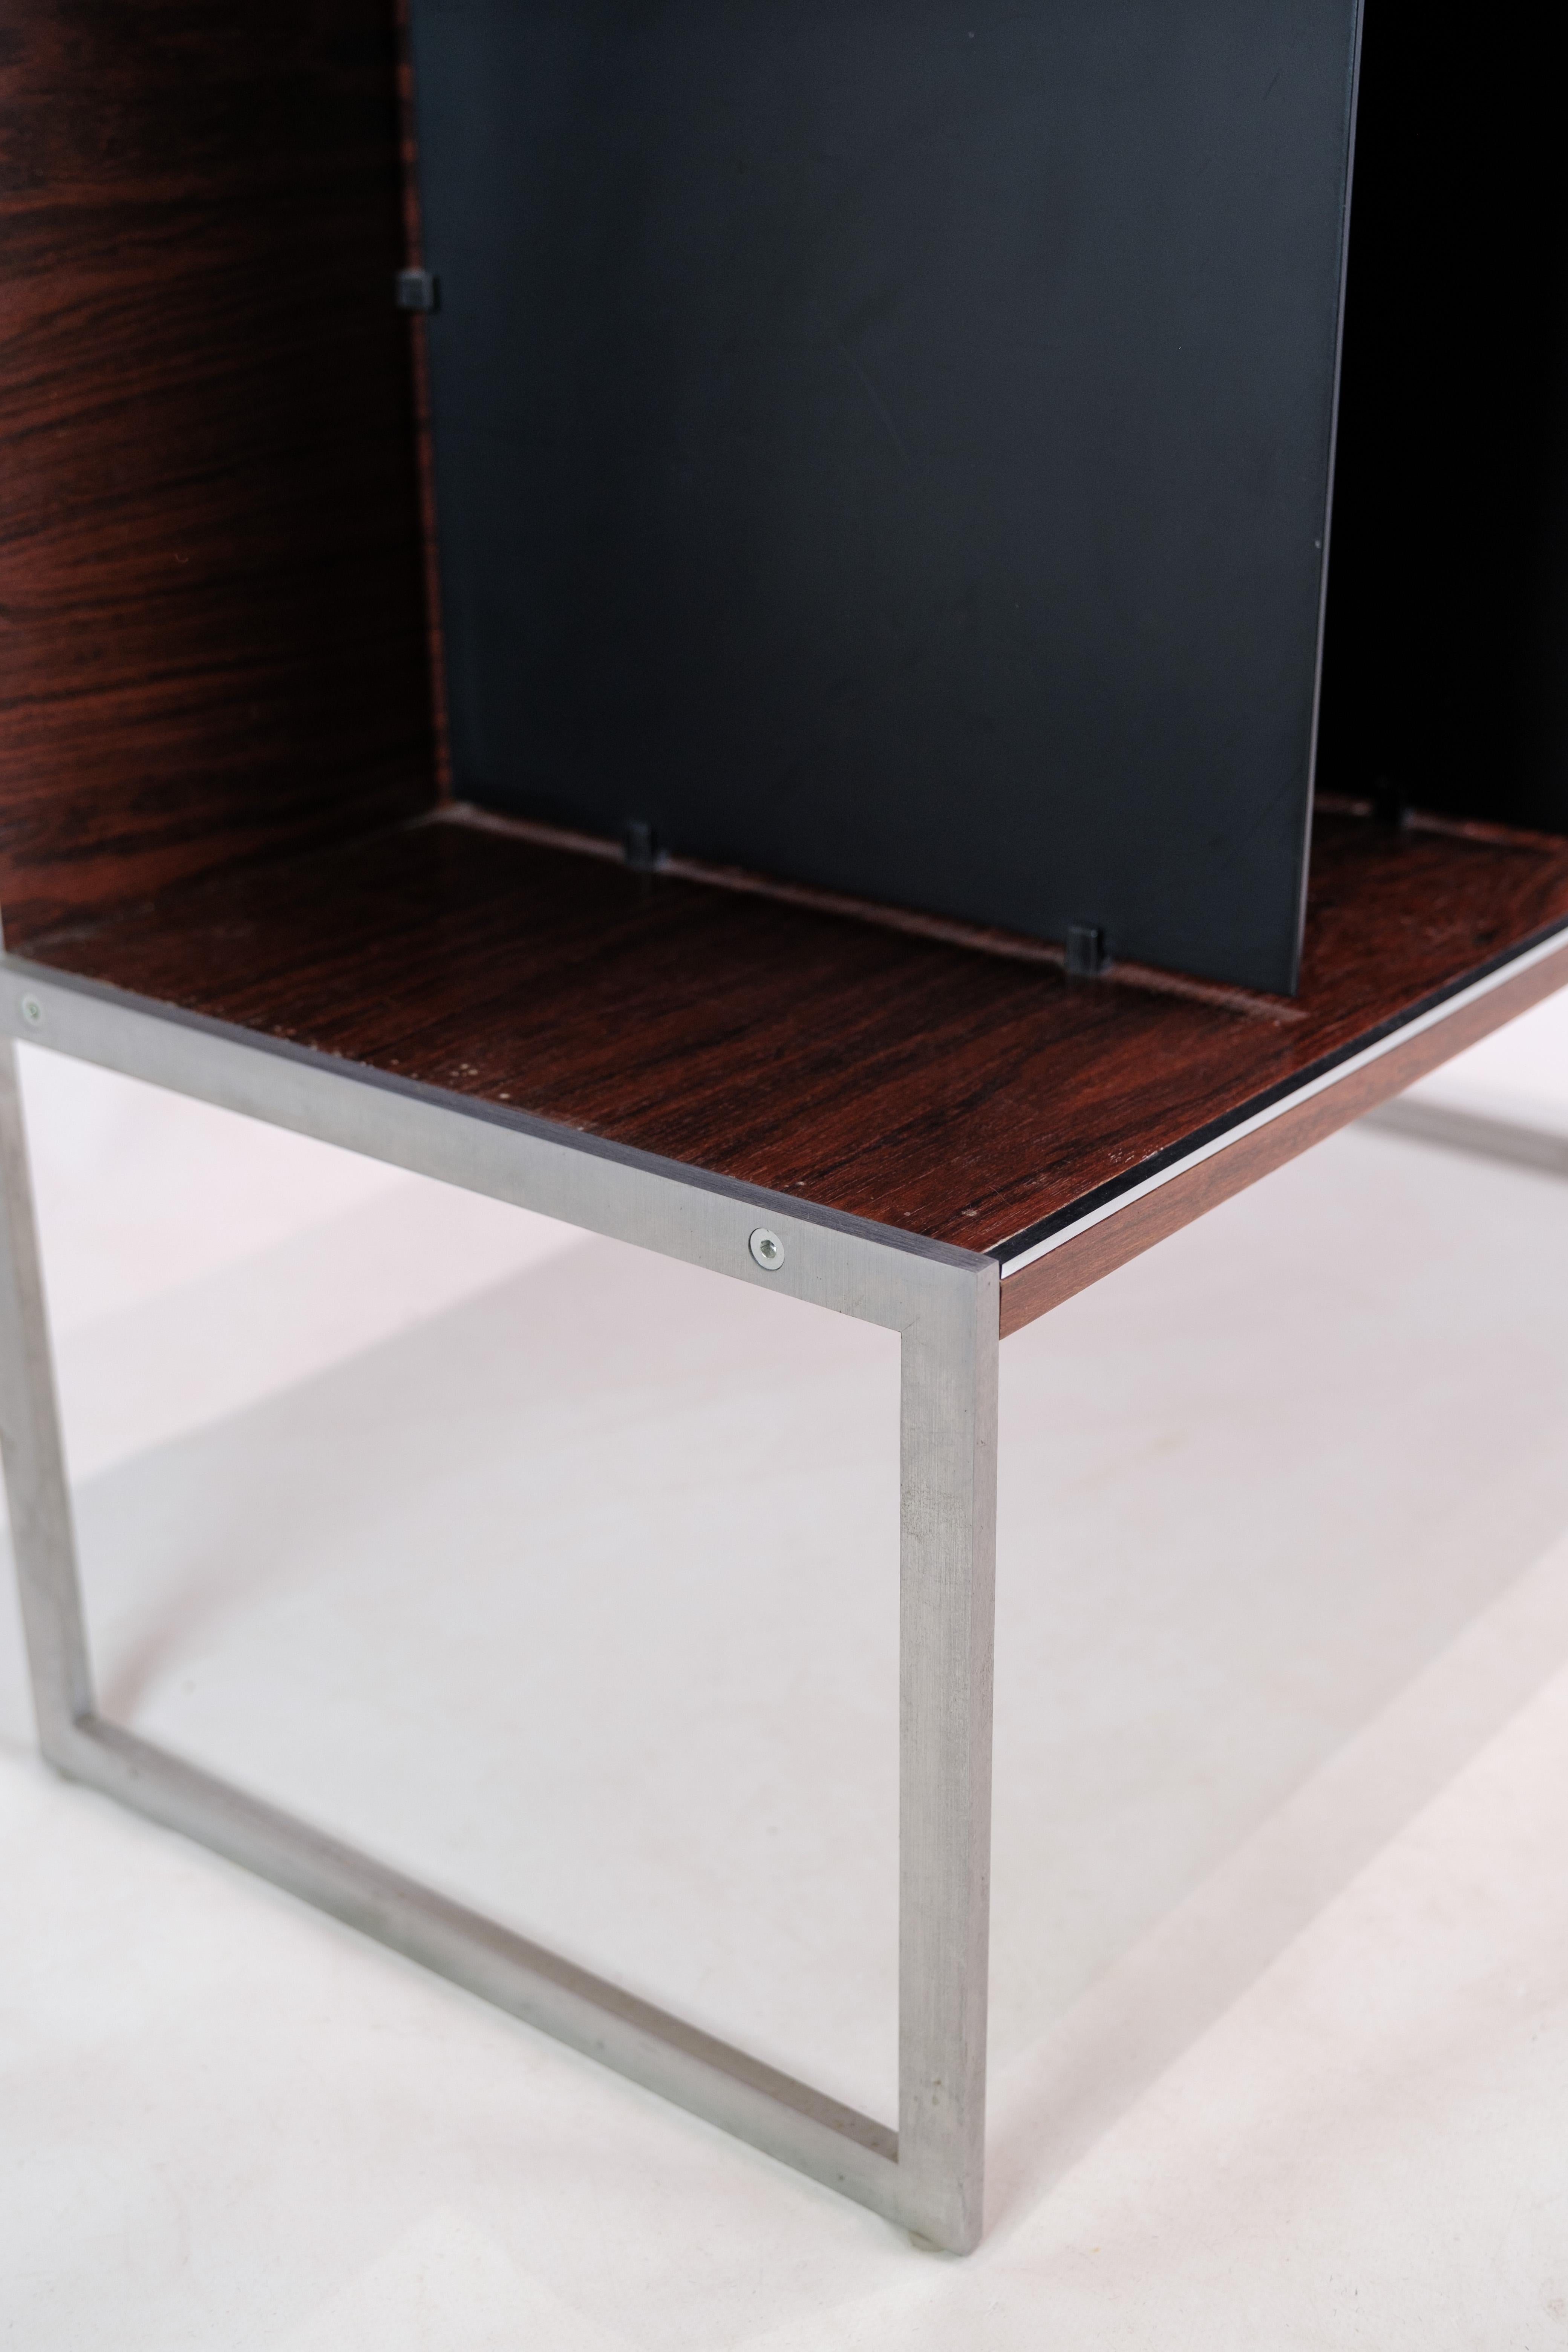 Danish Tv Furniture Made In Rosewood By Jacob Jensen Made By Bang & Olufsen From 1970s